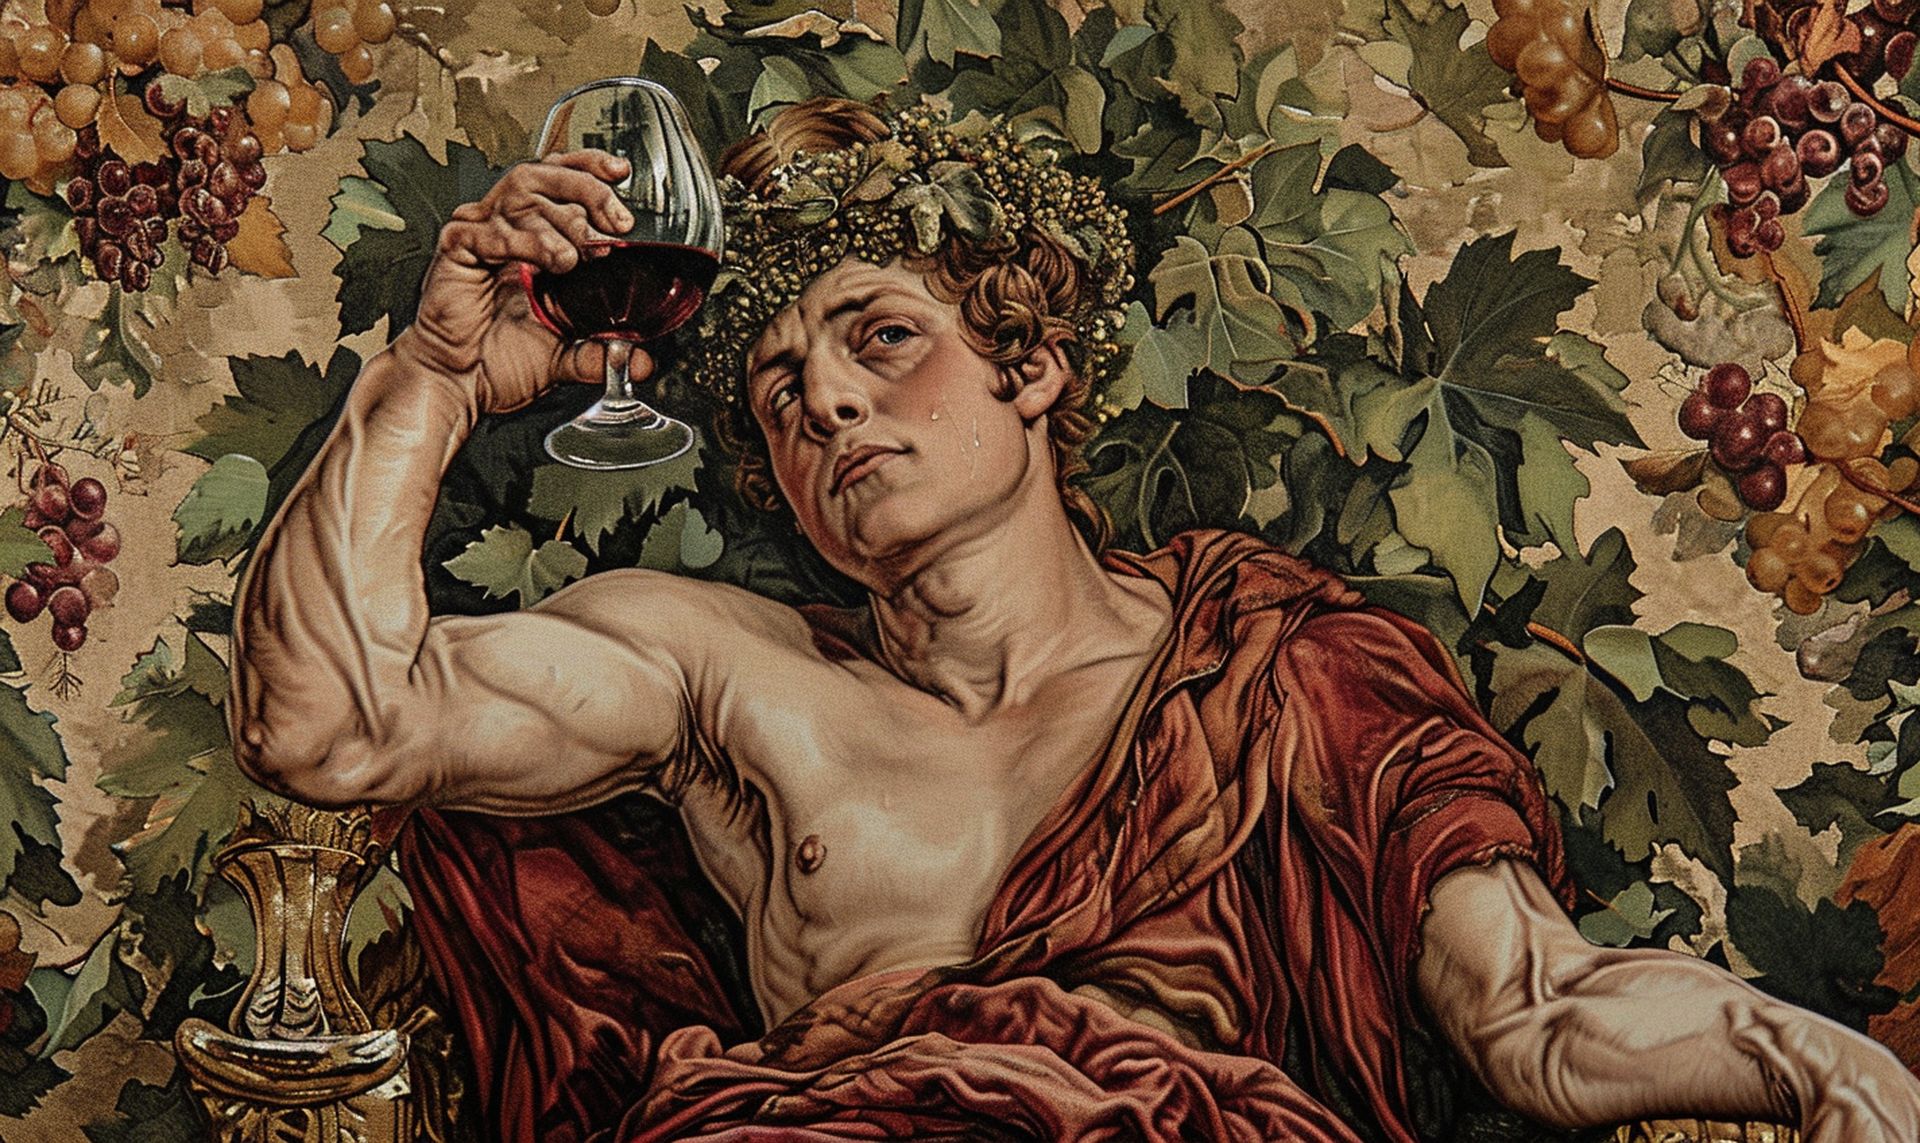 In the grand tapestry of cultural and philosophical thought, Dionysus, the God of Wine, emerges as a figure transcending his mythological roots. He represents the joy of wine and a deeper, more profound understanding of human experience and cultural evolution by umut taydaş